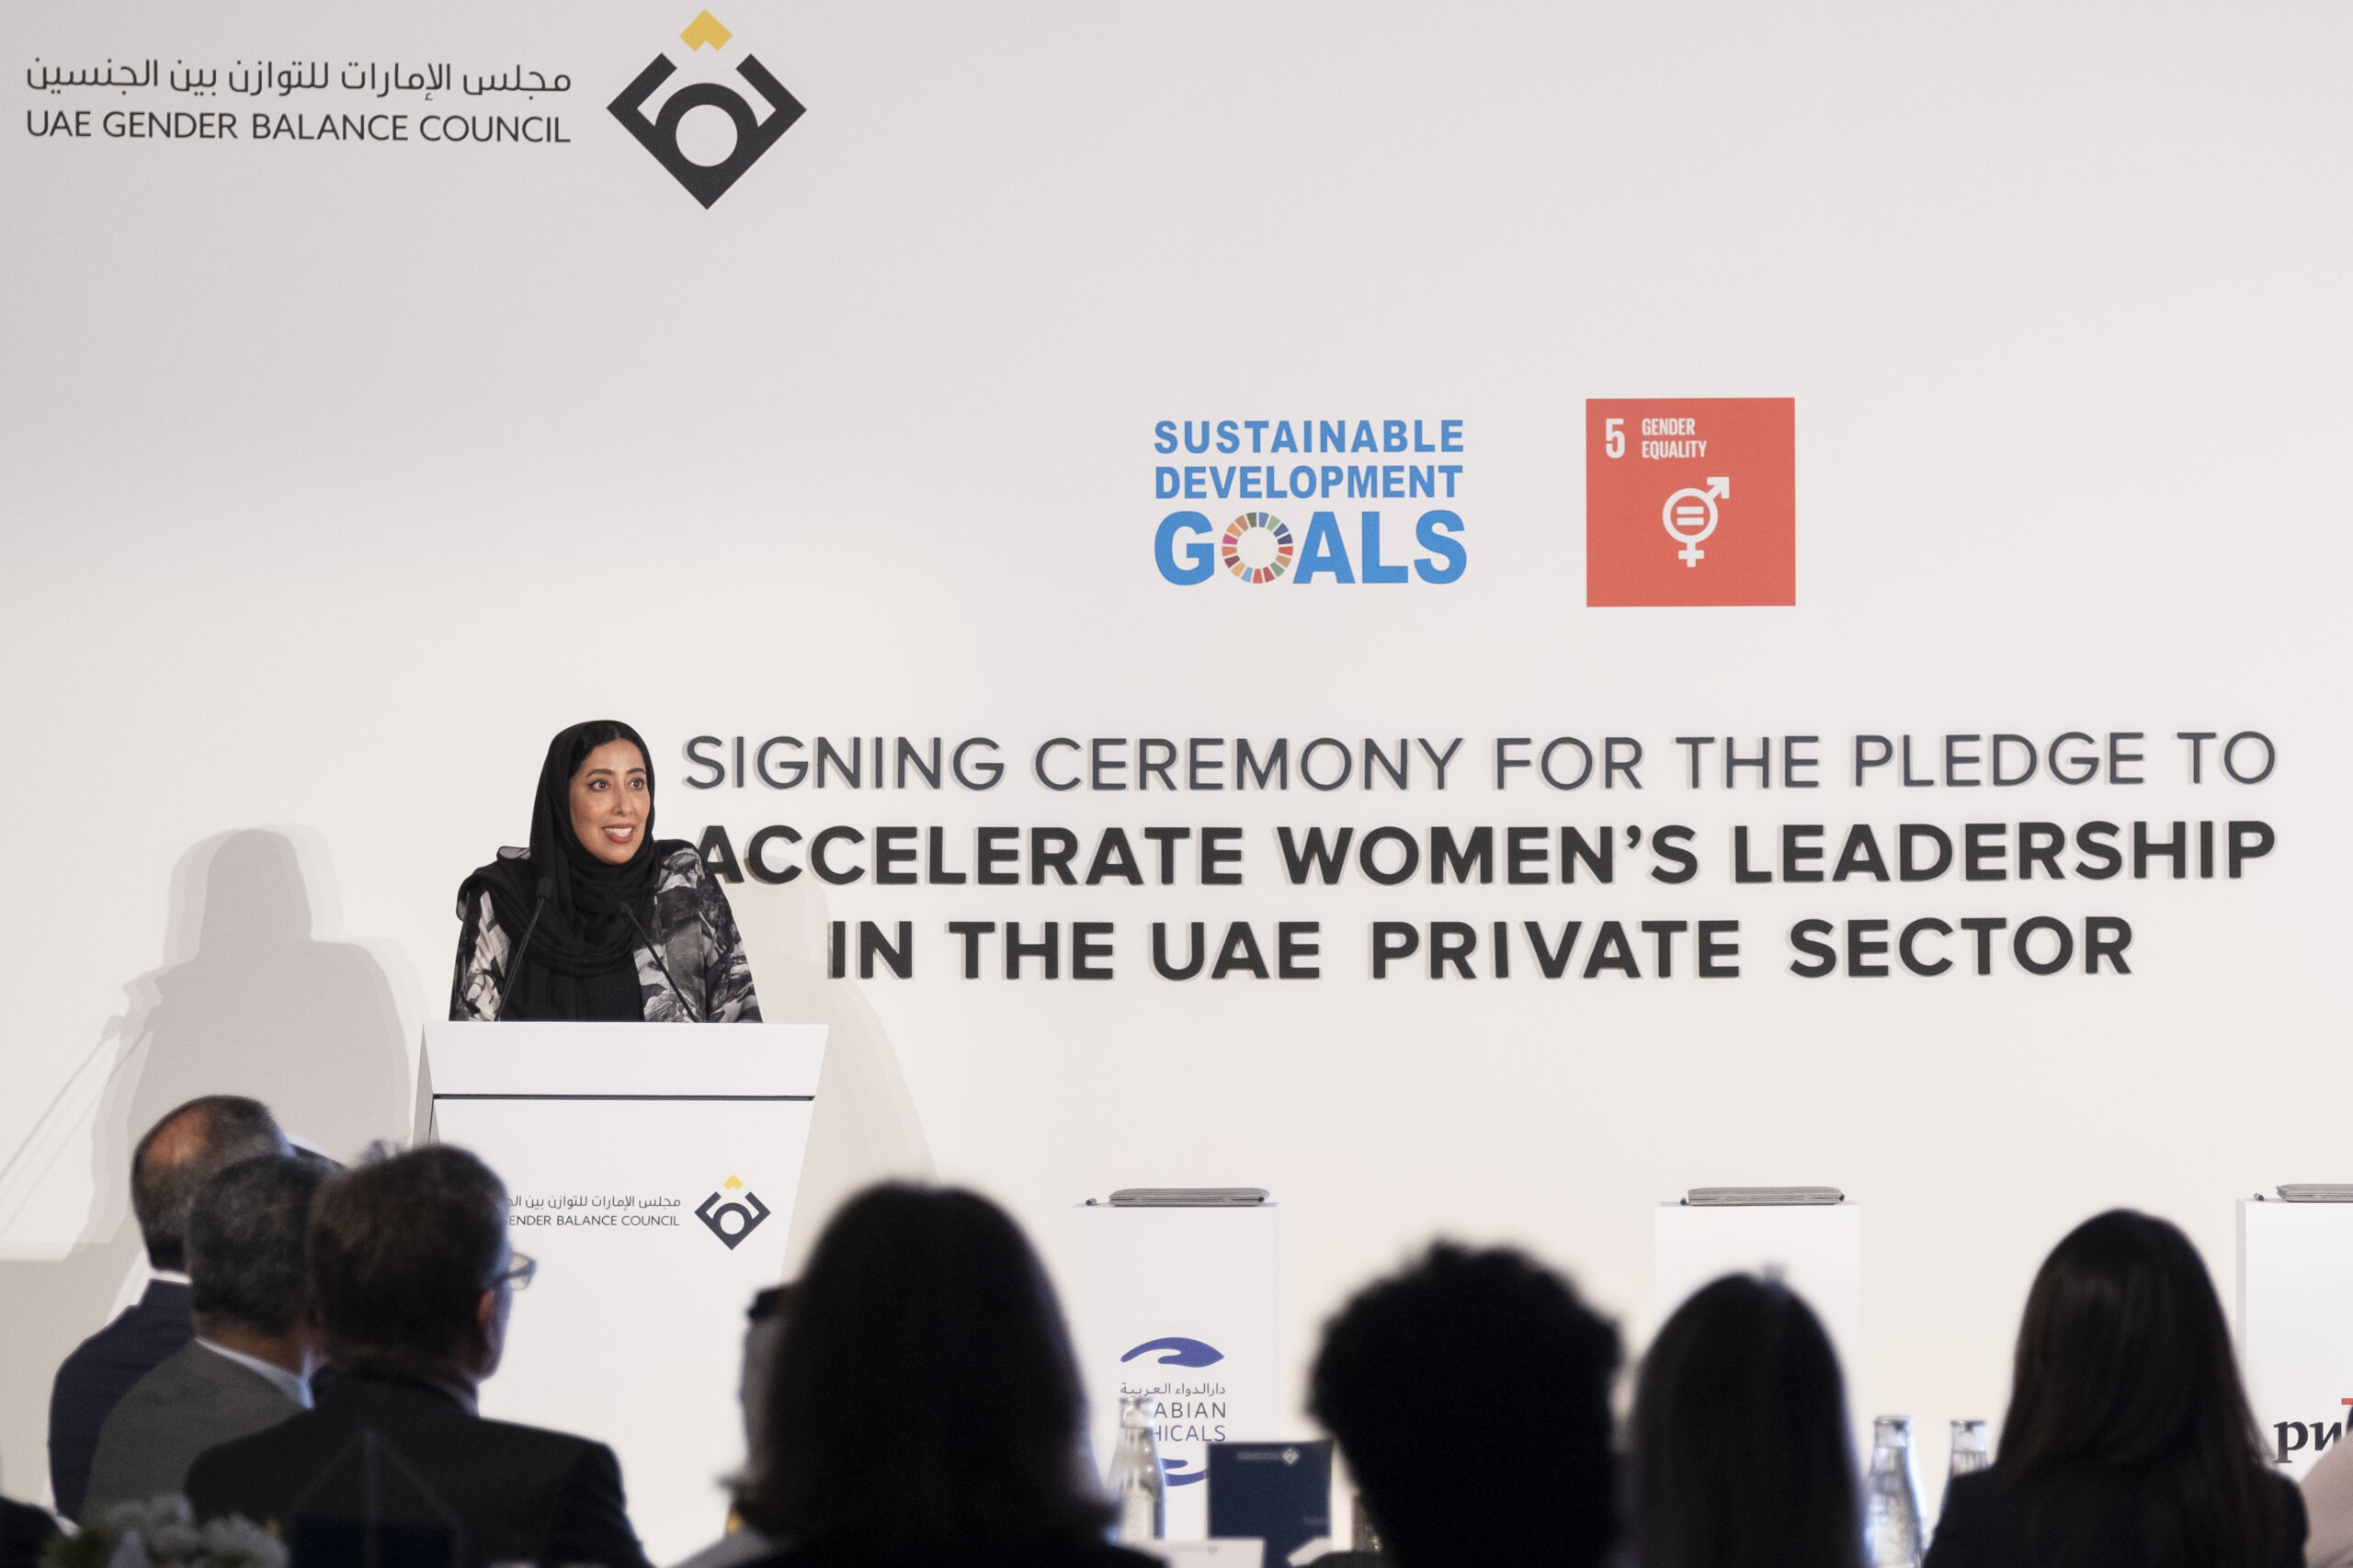 Mona Ghanem Al Marri, Vice President of the UAE Gender Balance Council (GBC UAE) at the SDG 5 pledge signing in May 2023|UAE-based private-sector companies that signed the GBC's SDG 5 pledge on 24 May 2023: Arabian Ethicals; BSH Home Appliances Middle East; Emirates; NBD; ENGIE; Mercer; Nissan; Pfizer; PwC Middle East.